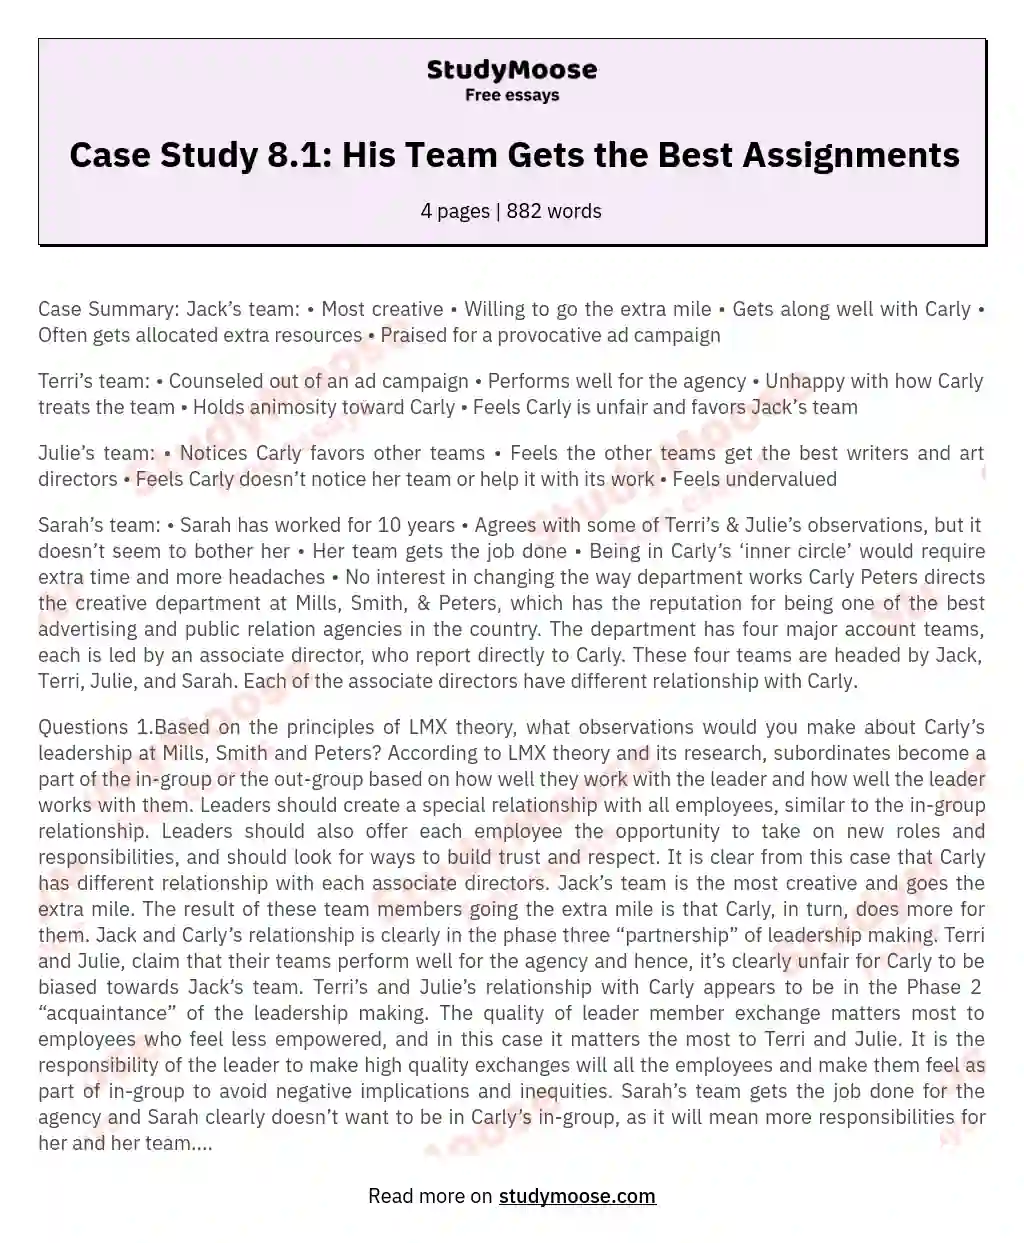 Case Study 8.1: His Team Gets the Best Assignments